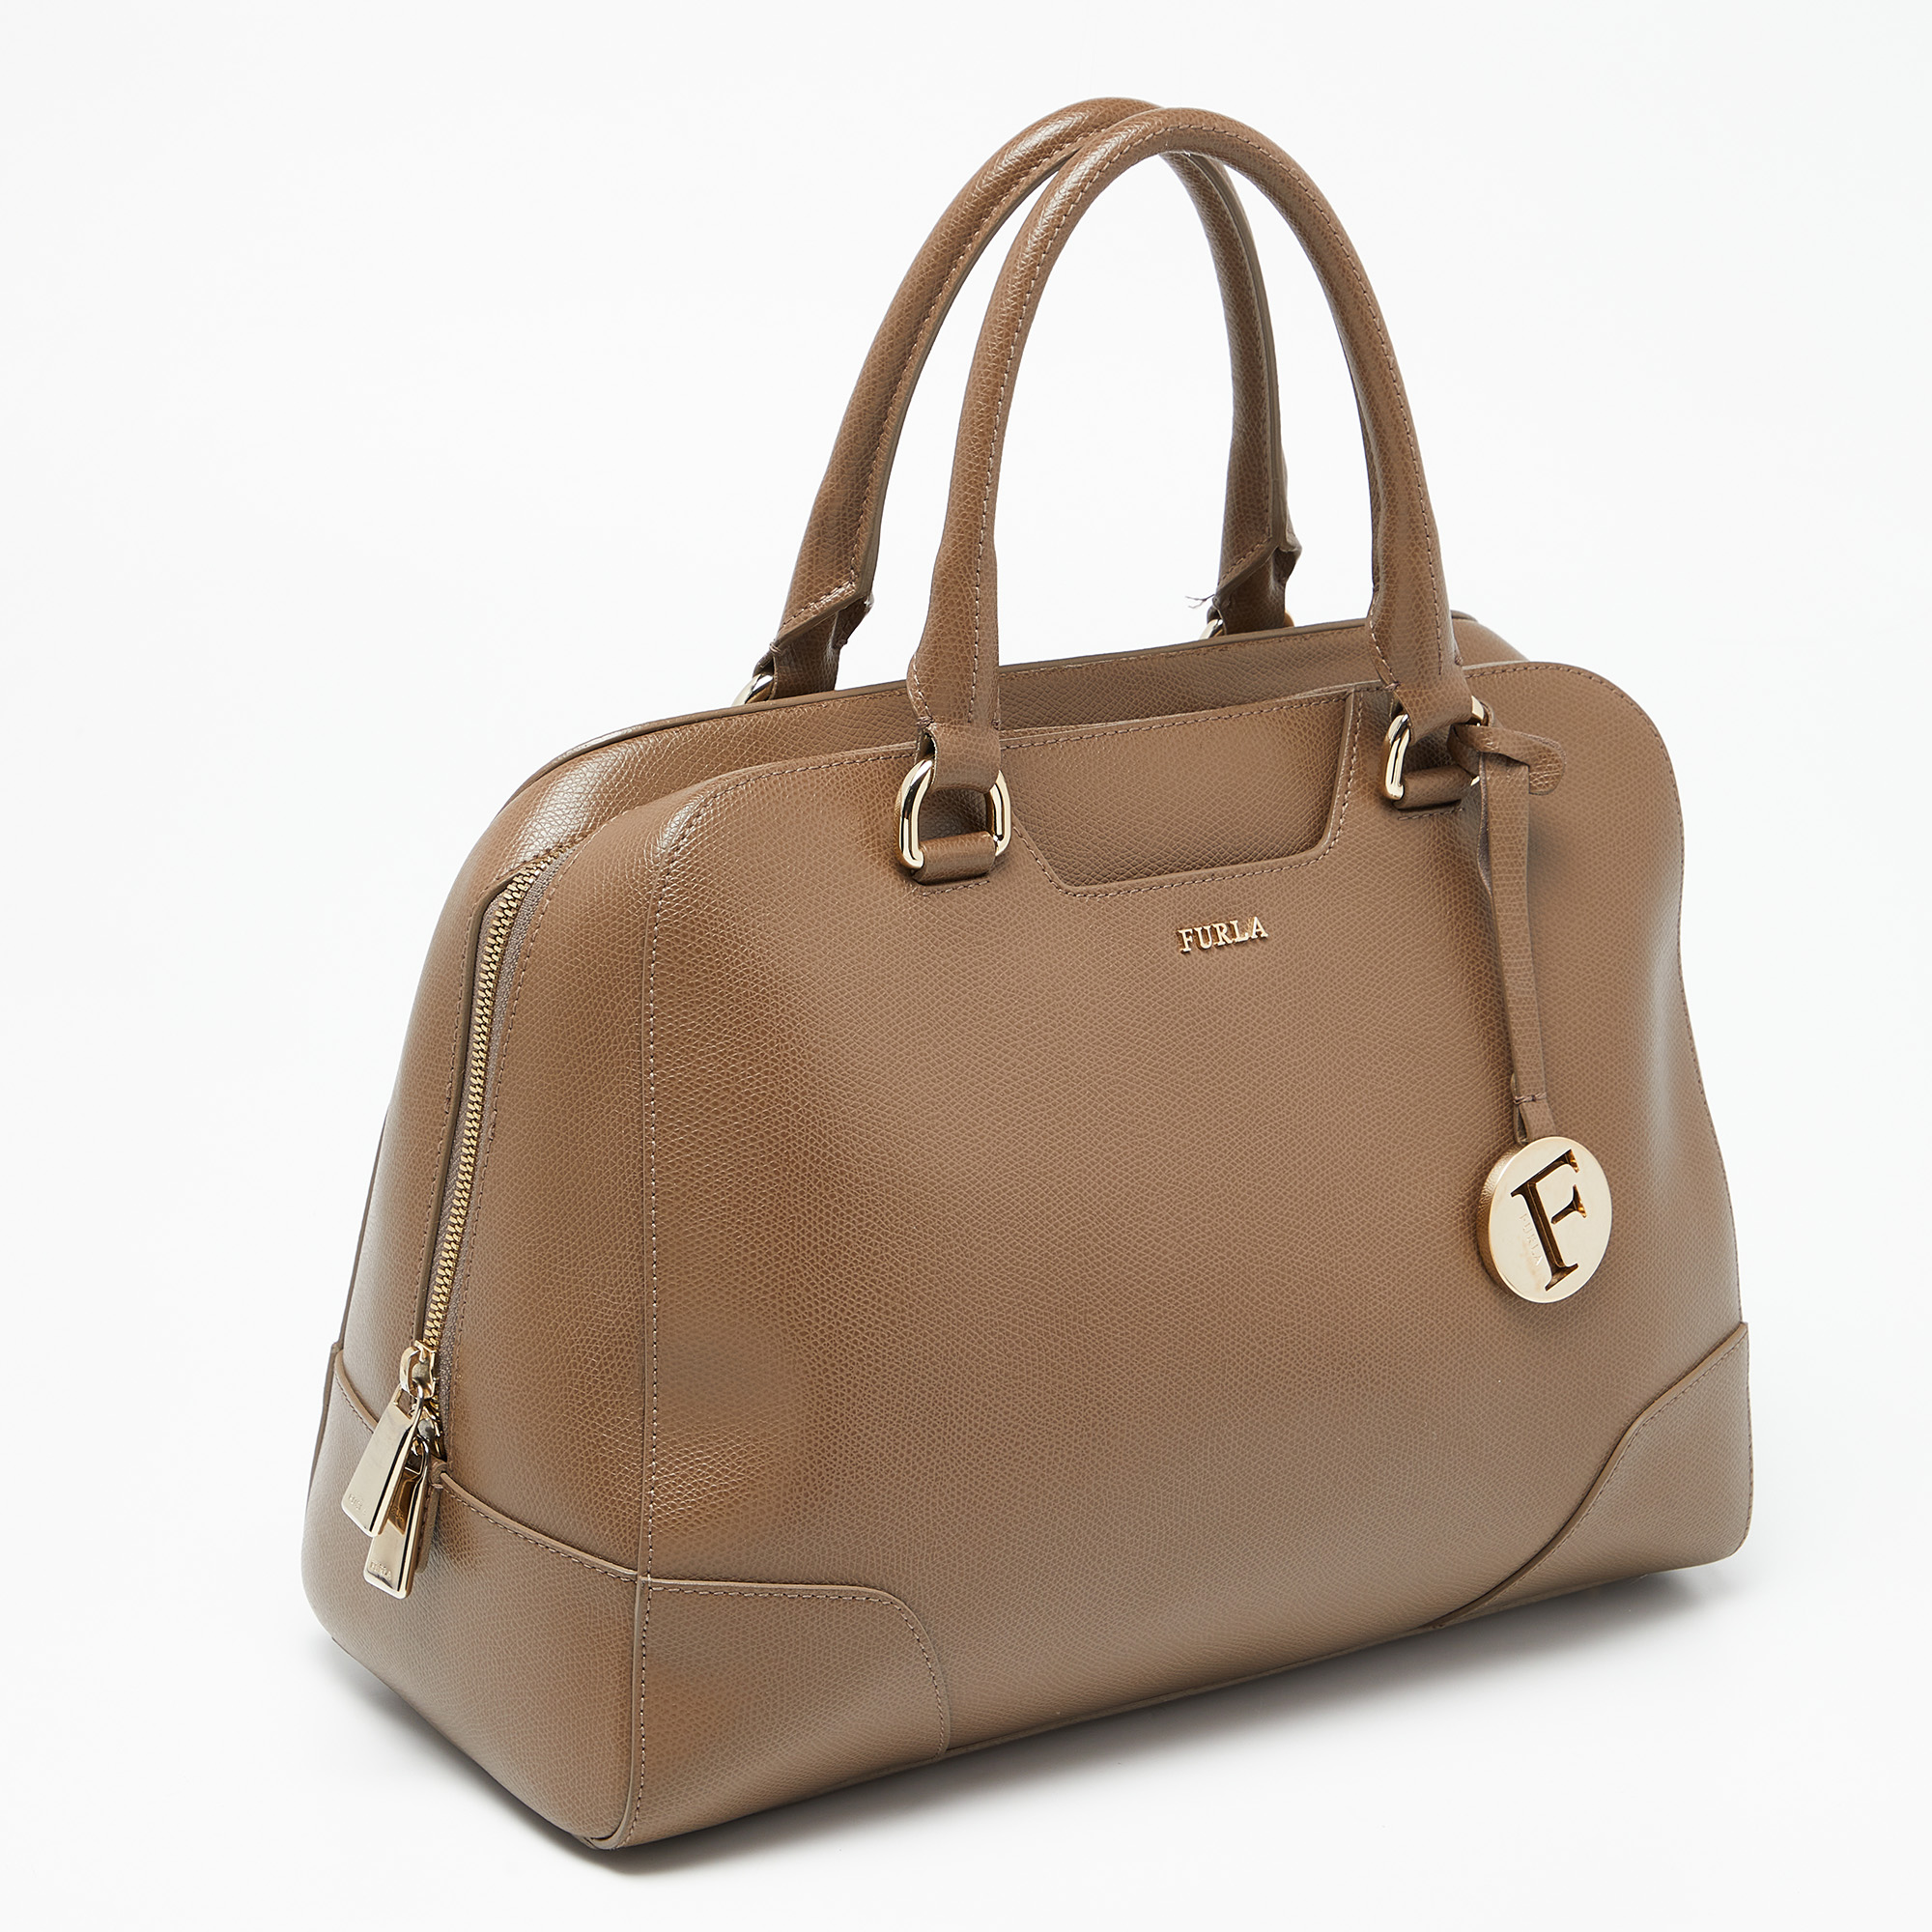 Furla Brown Leather Dolly Satchel